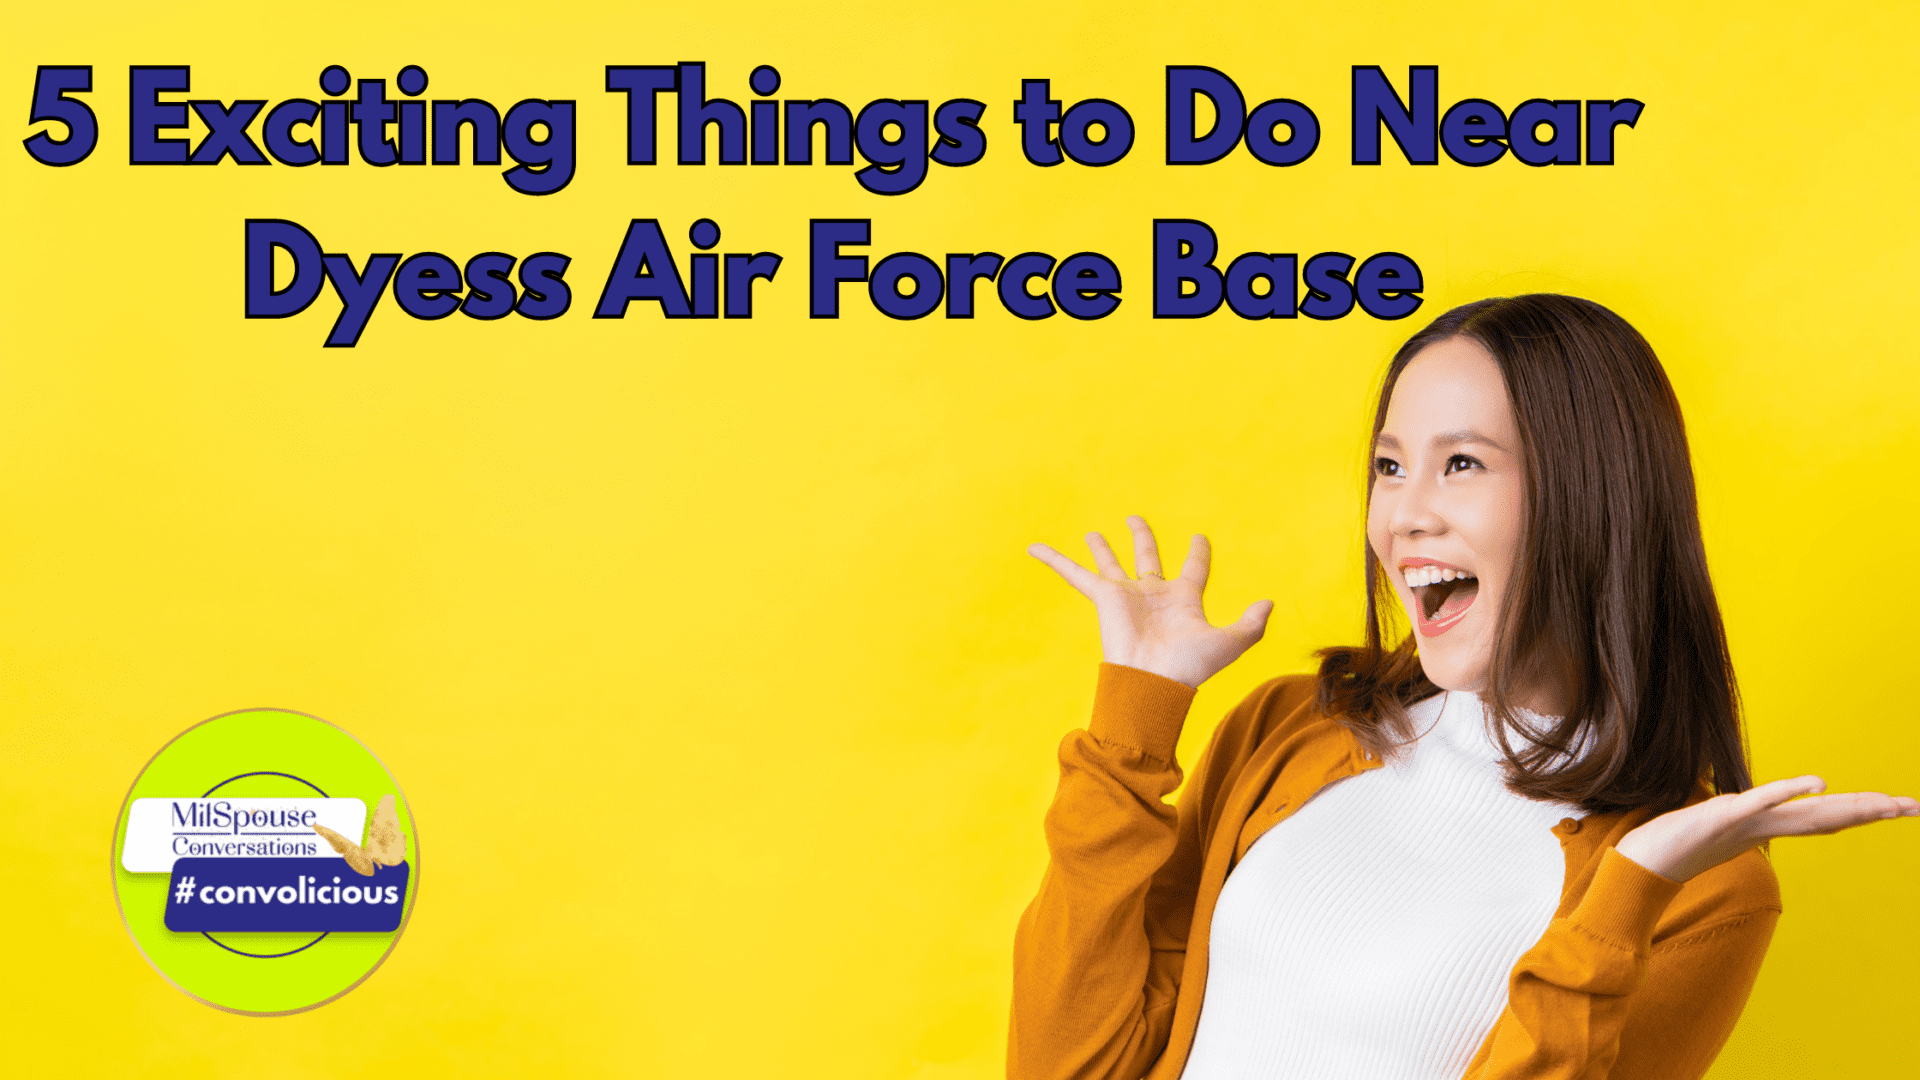 5 Exciting Things to Do Near Dyess Air Force Base